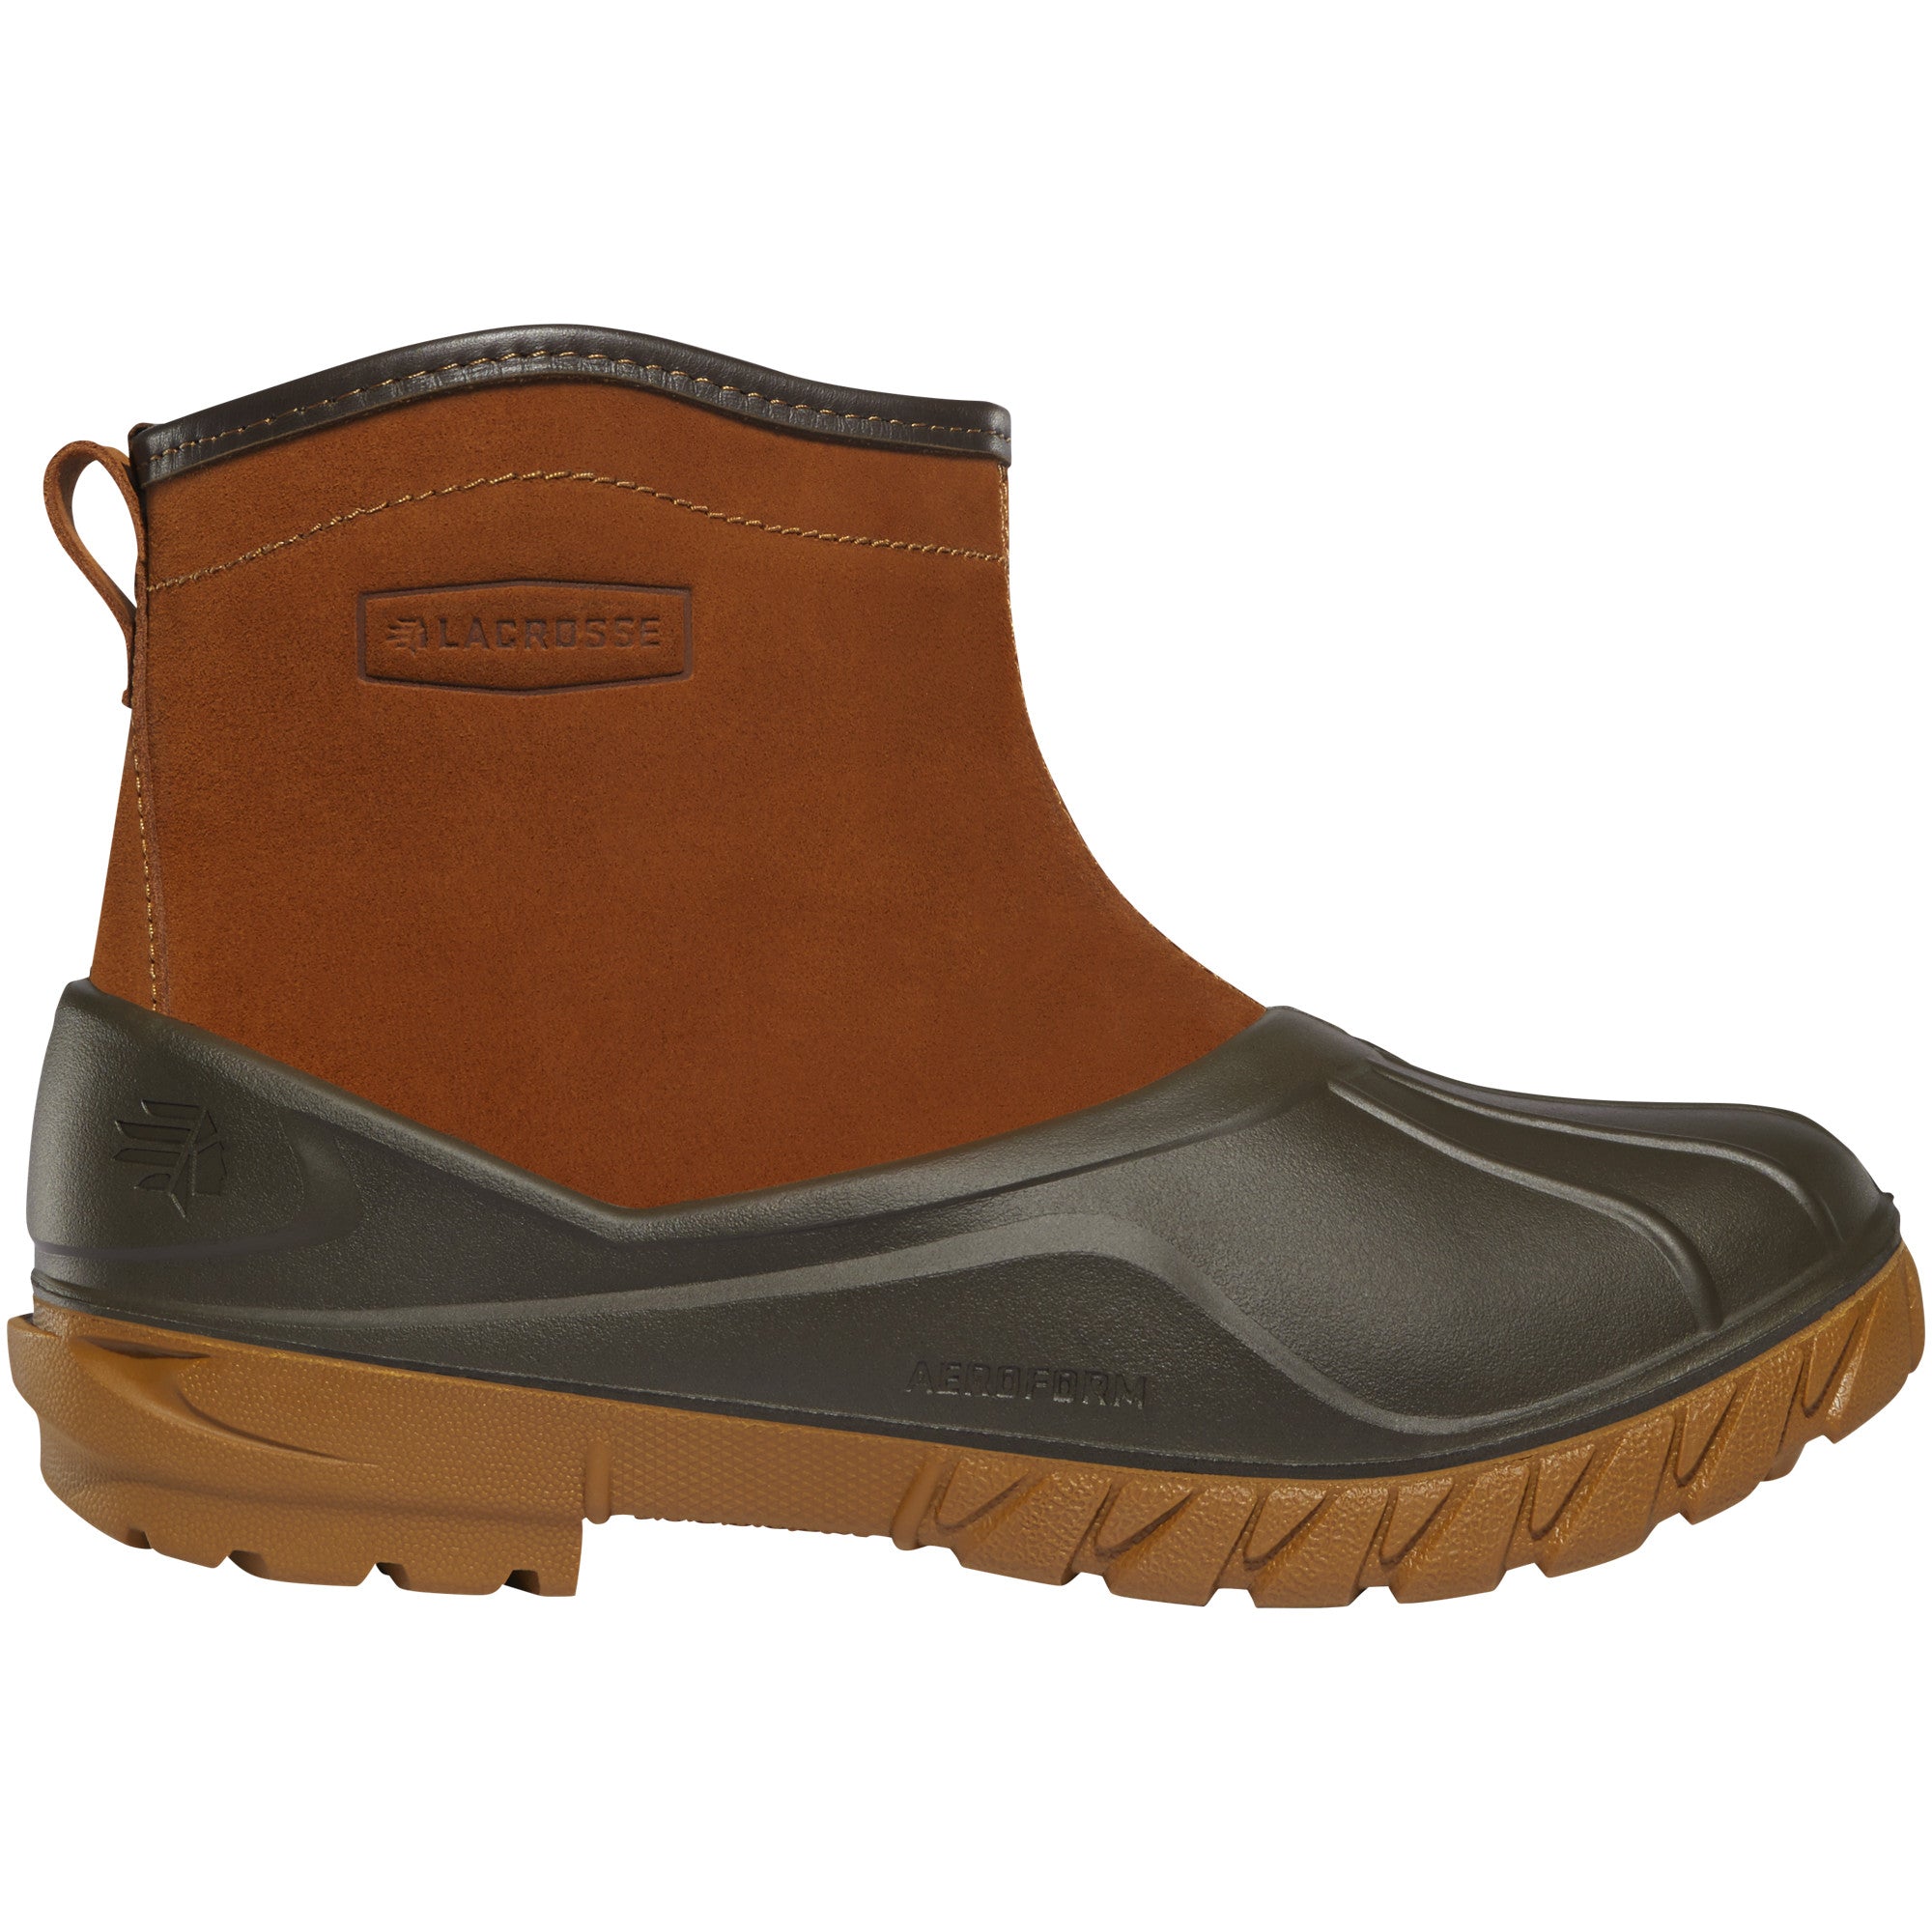 LaCrosse Men's Aero Timber Top Slip-On 6" Waterproof Outdoor Boot in Clay Brown from the side